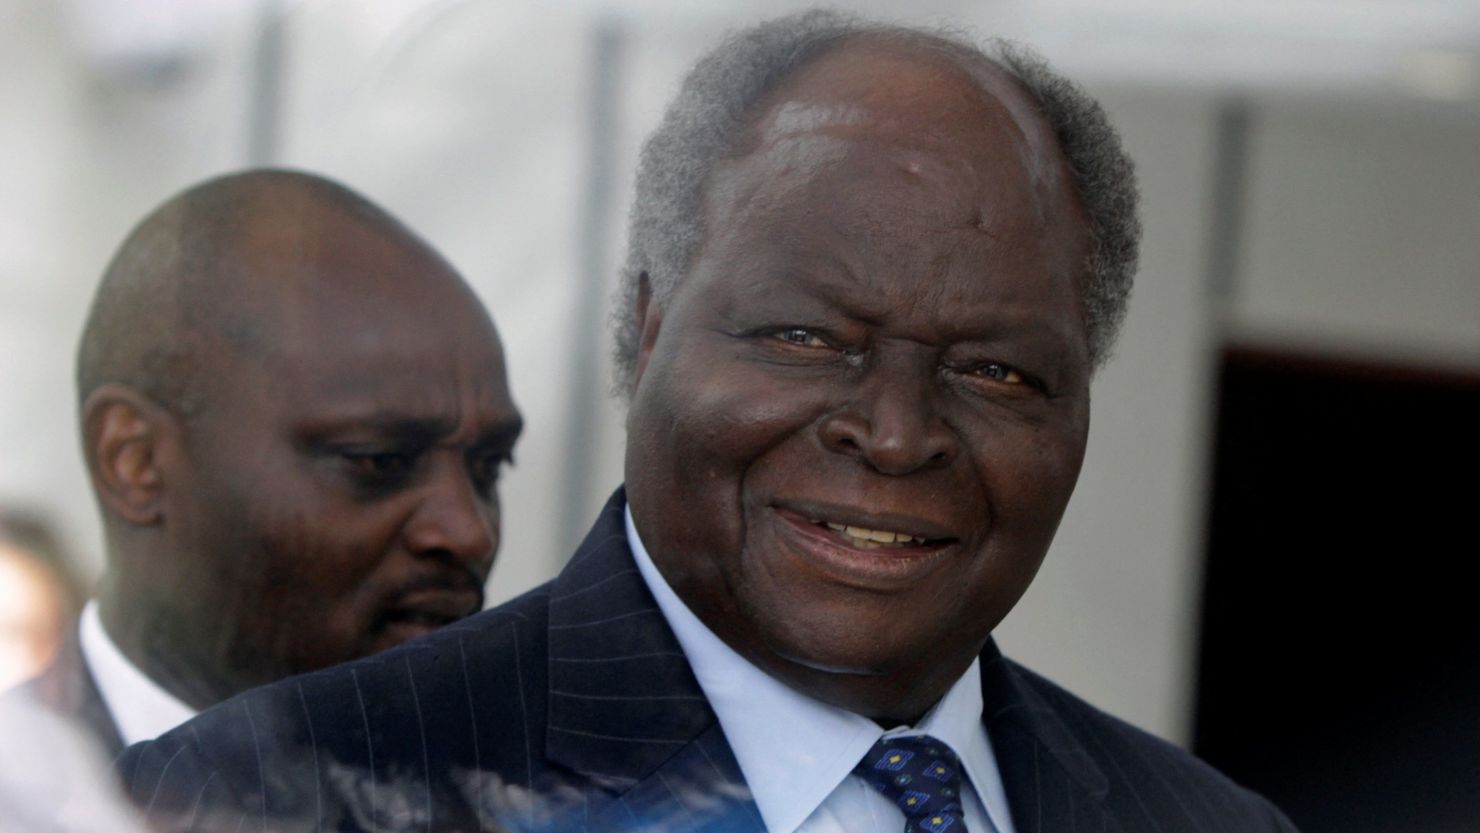 Kenya's President Mwai Kibaki is seen walking behind a glass wall as he arrives for the inauguration of the new African Union building in Ethiopia's capital Addis Ababa, on January 28, 2012.